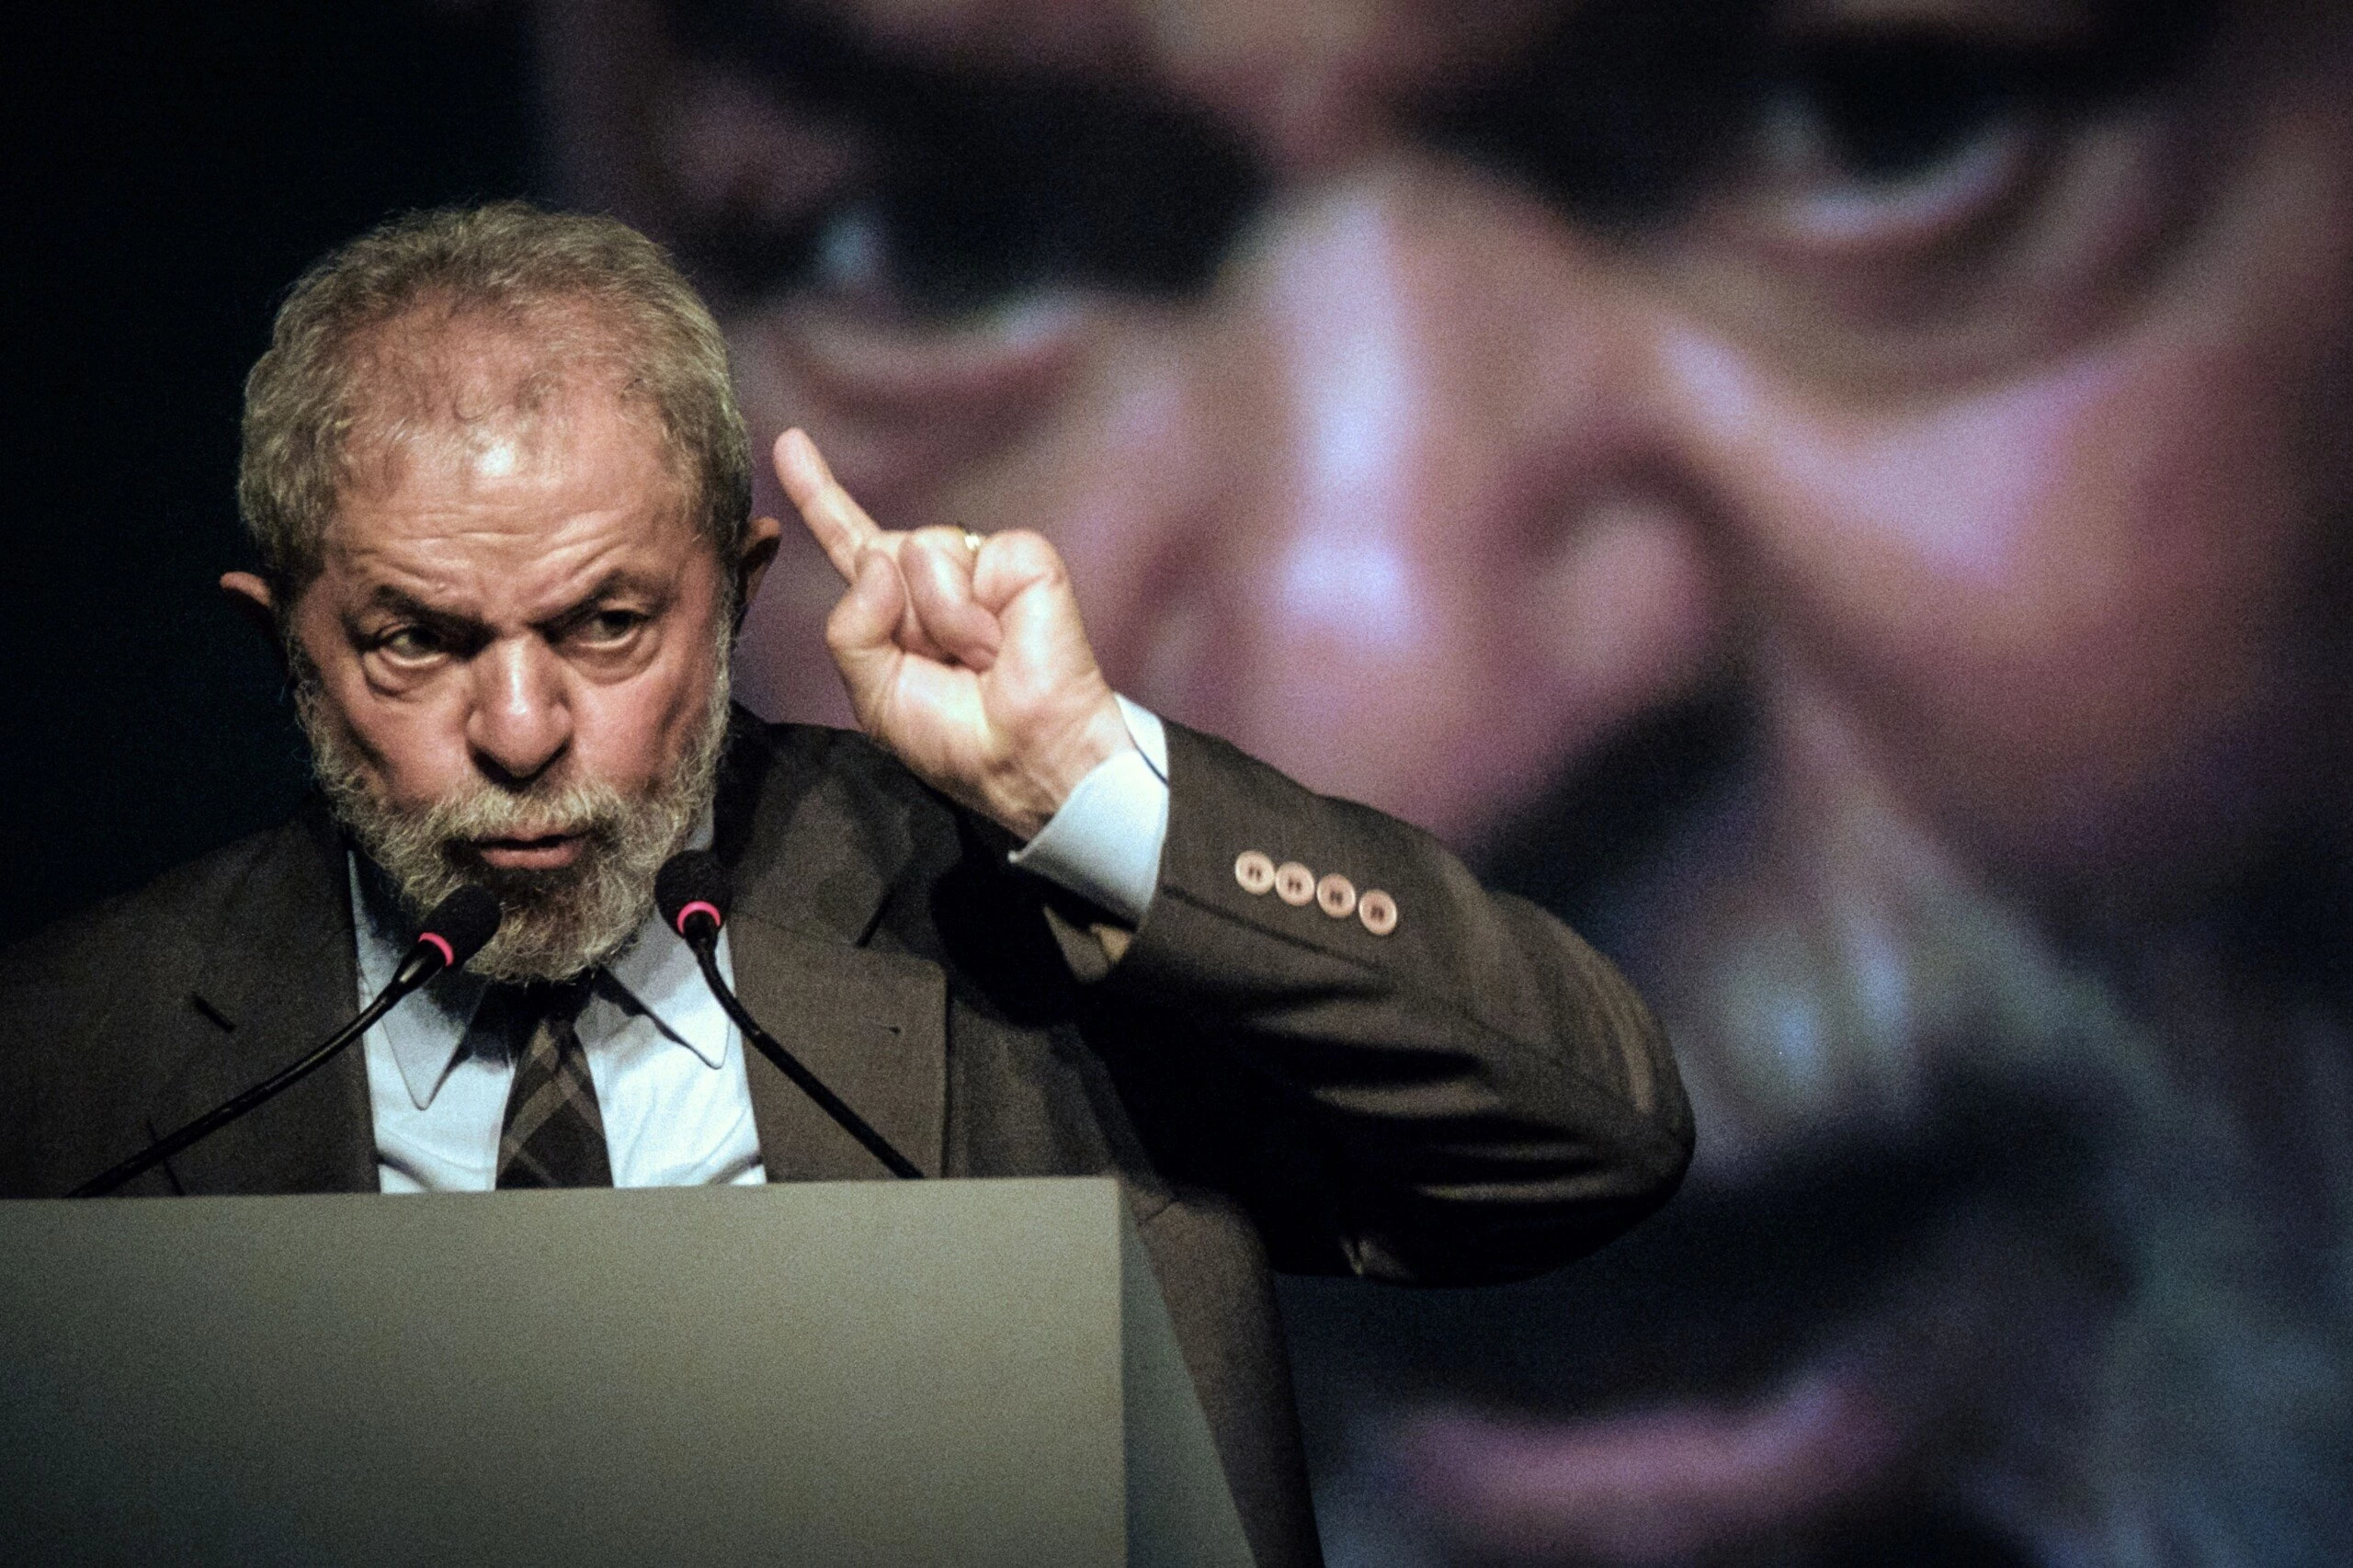 TOPSHOT - Brazil's former president (2003-2011) Luiz Inacio Lula da Silva speaks during the second congress of the IndustriALL Global Union in Rio de Janeiro, Brazil on October 4, 2016.IndustriALL Global Union represents workers in the mining, energy and manufacturing sectors in 140 countries around the world. / AFP / YASUYOSHI CHIBA (Photo credit should read YASUYOSHI CHIBA/AFP via Getty Images)